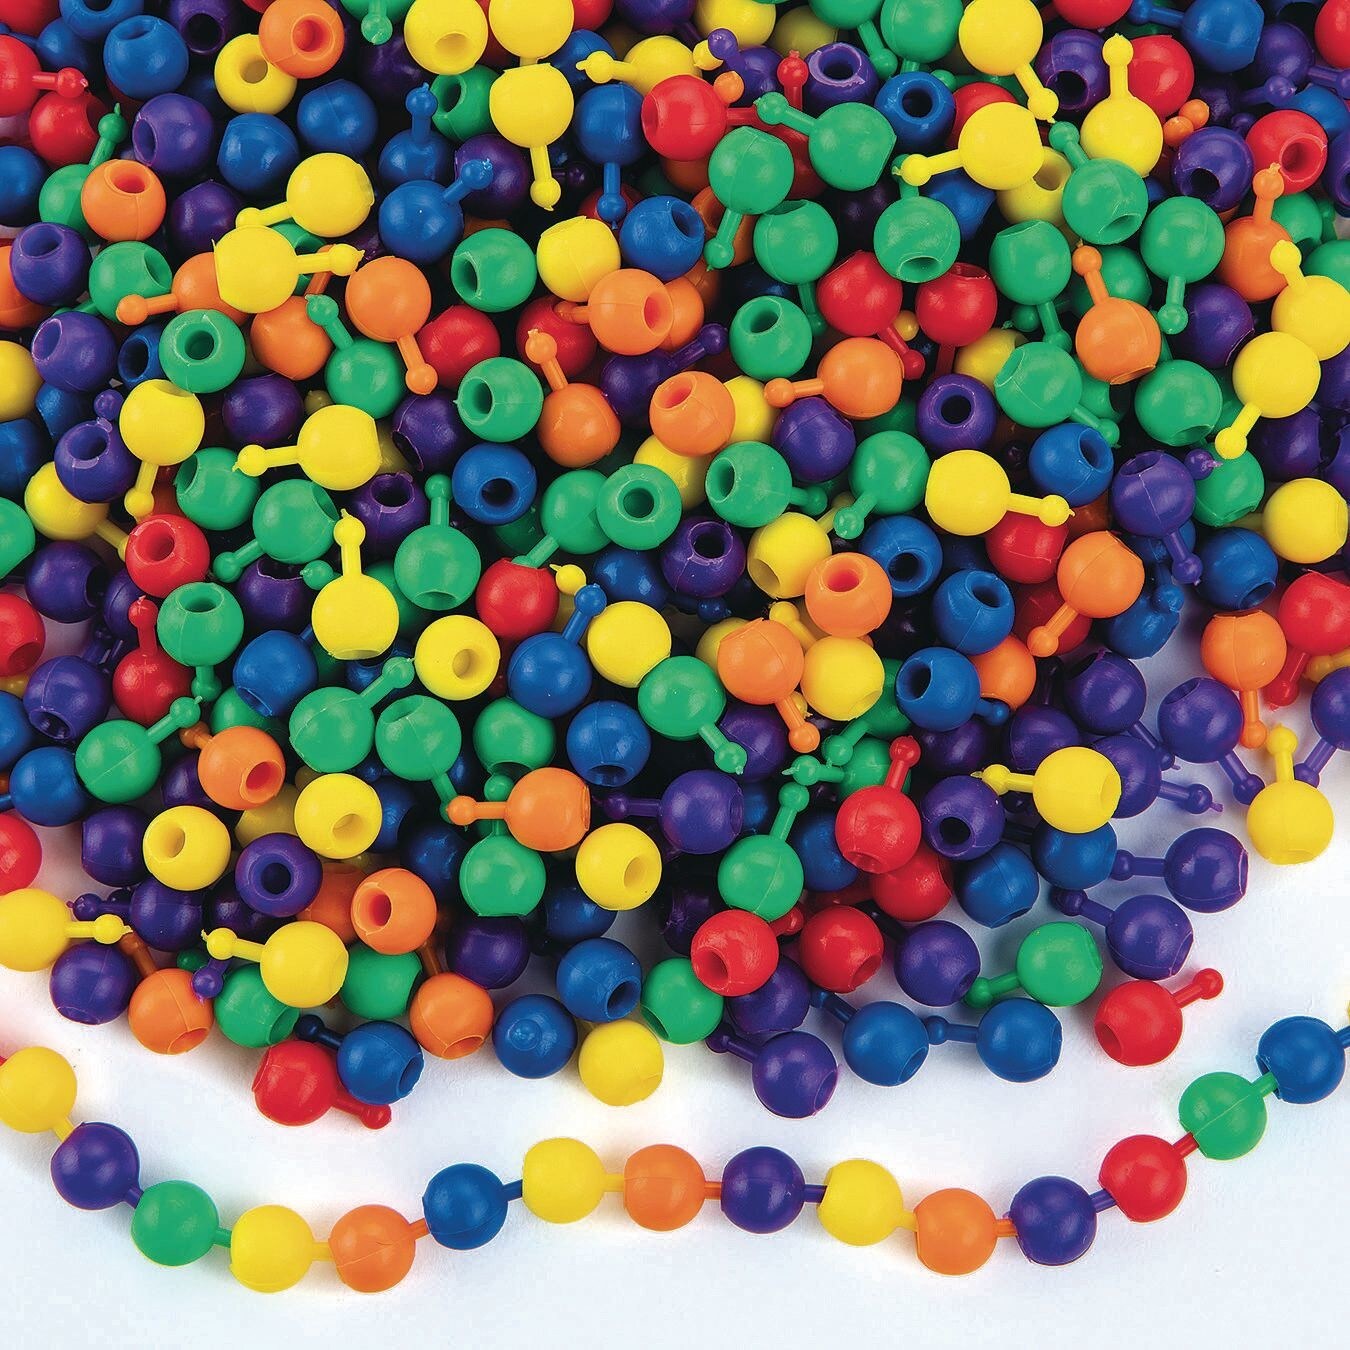 Bright Color Pop Beads by Creatology | Michaels